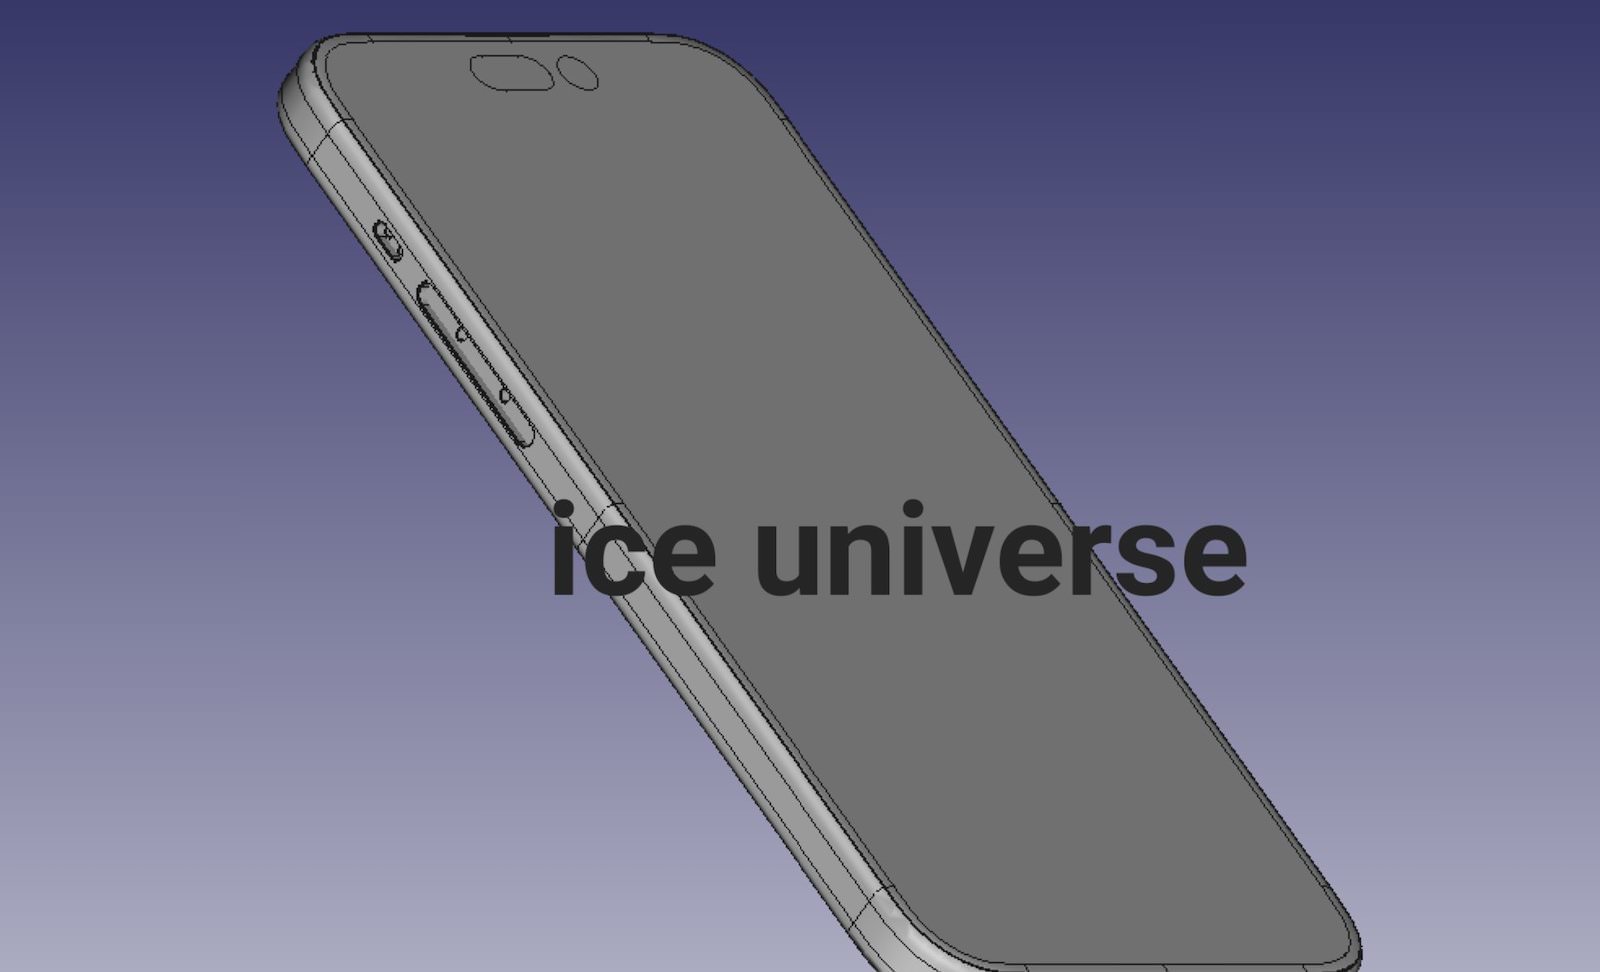 Iphone15promax ultra cad rendering